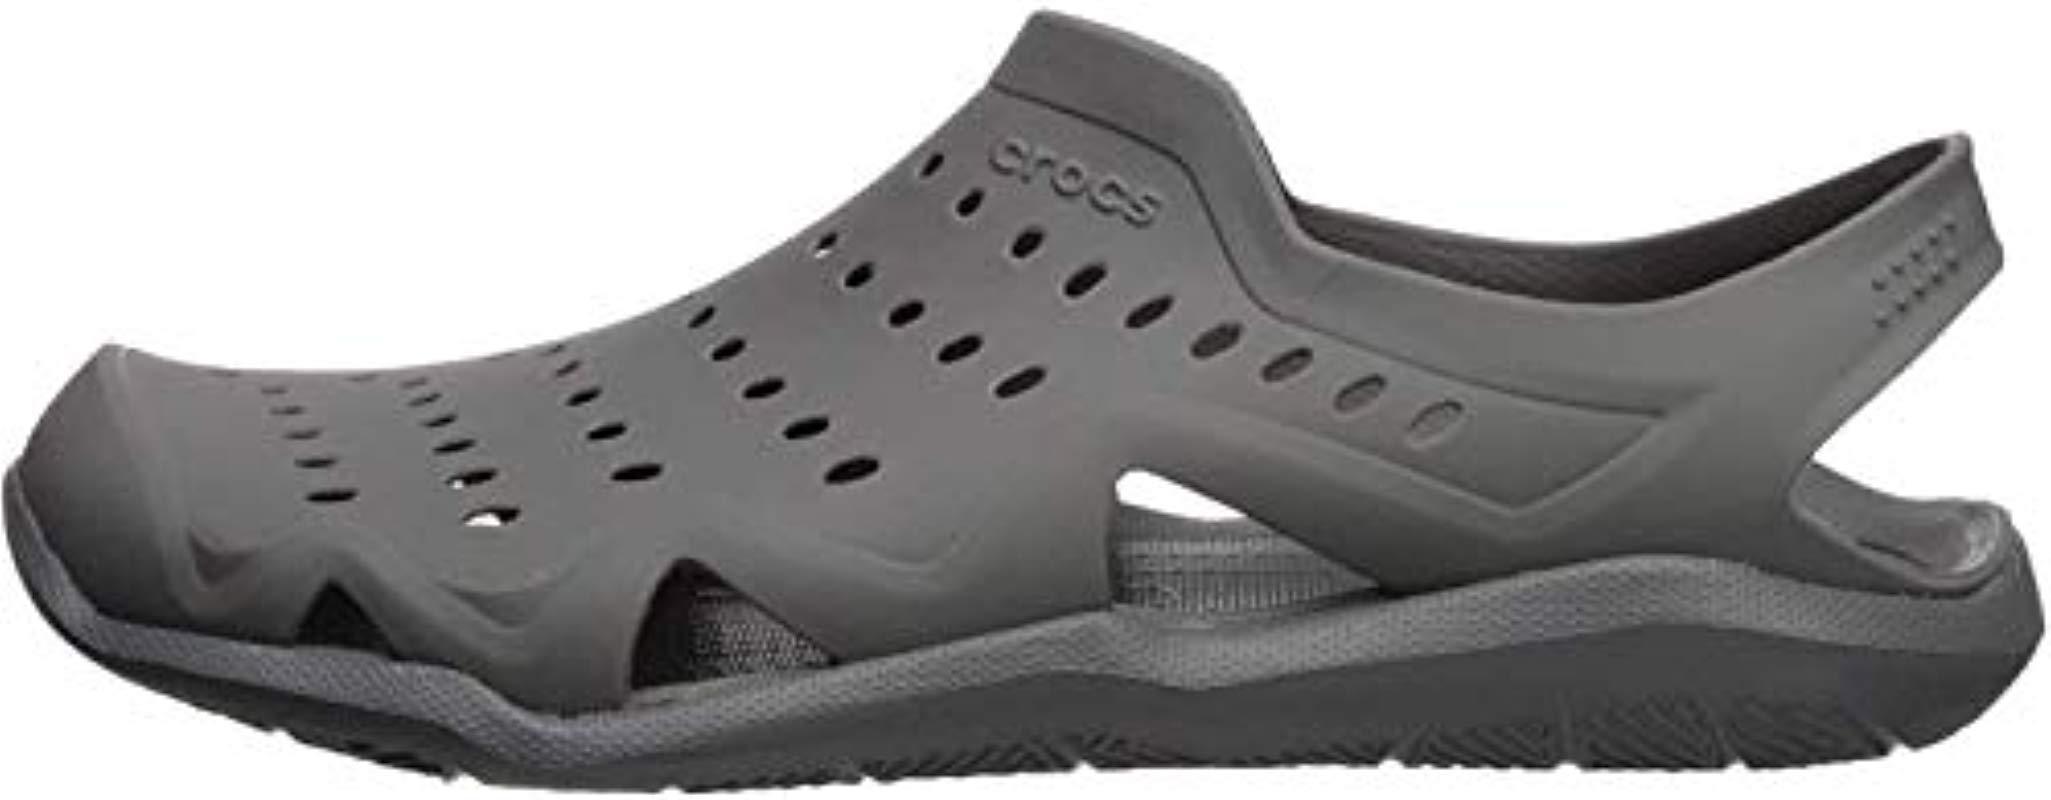 Crocs™ Swiftwater Wave Sports Sandals in Slate Grey (Gray) for Men ...